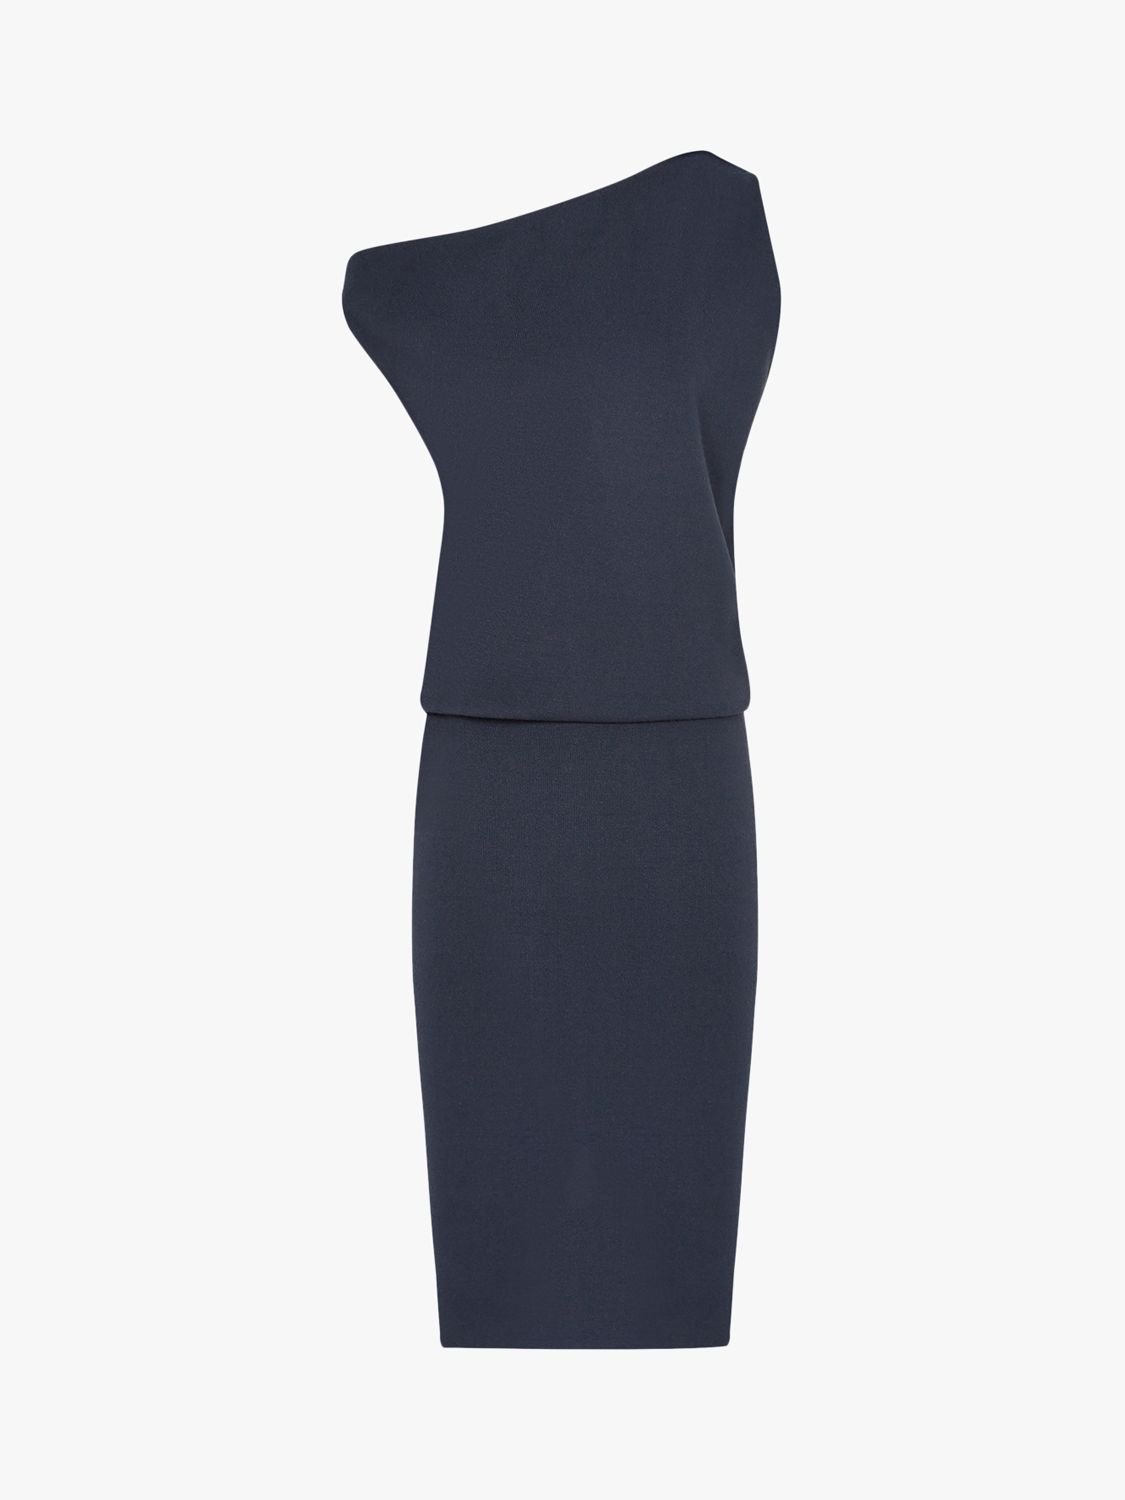 Reiss Claudine Draped Knitted Dress, Navy